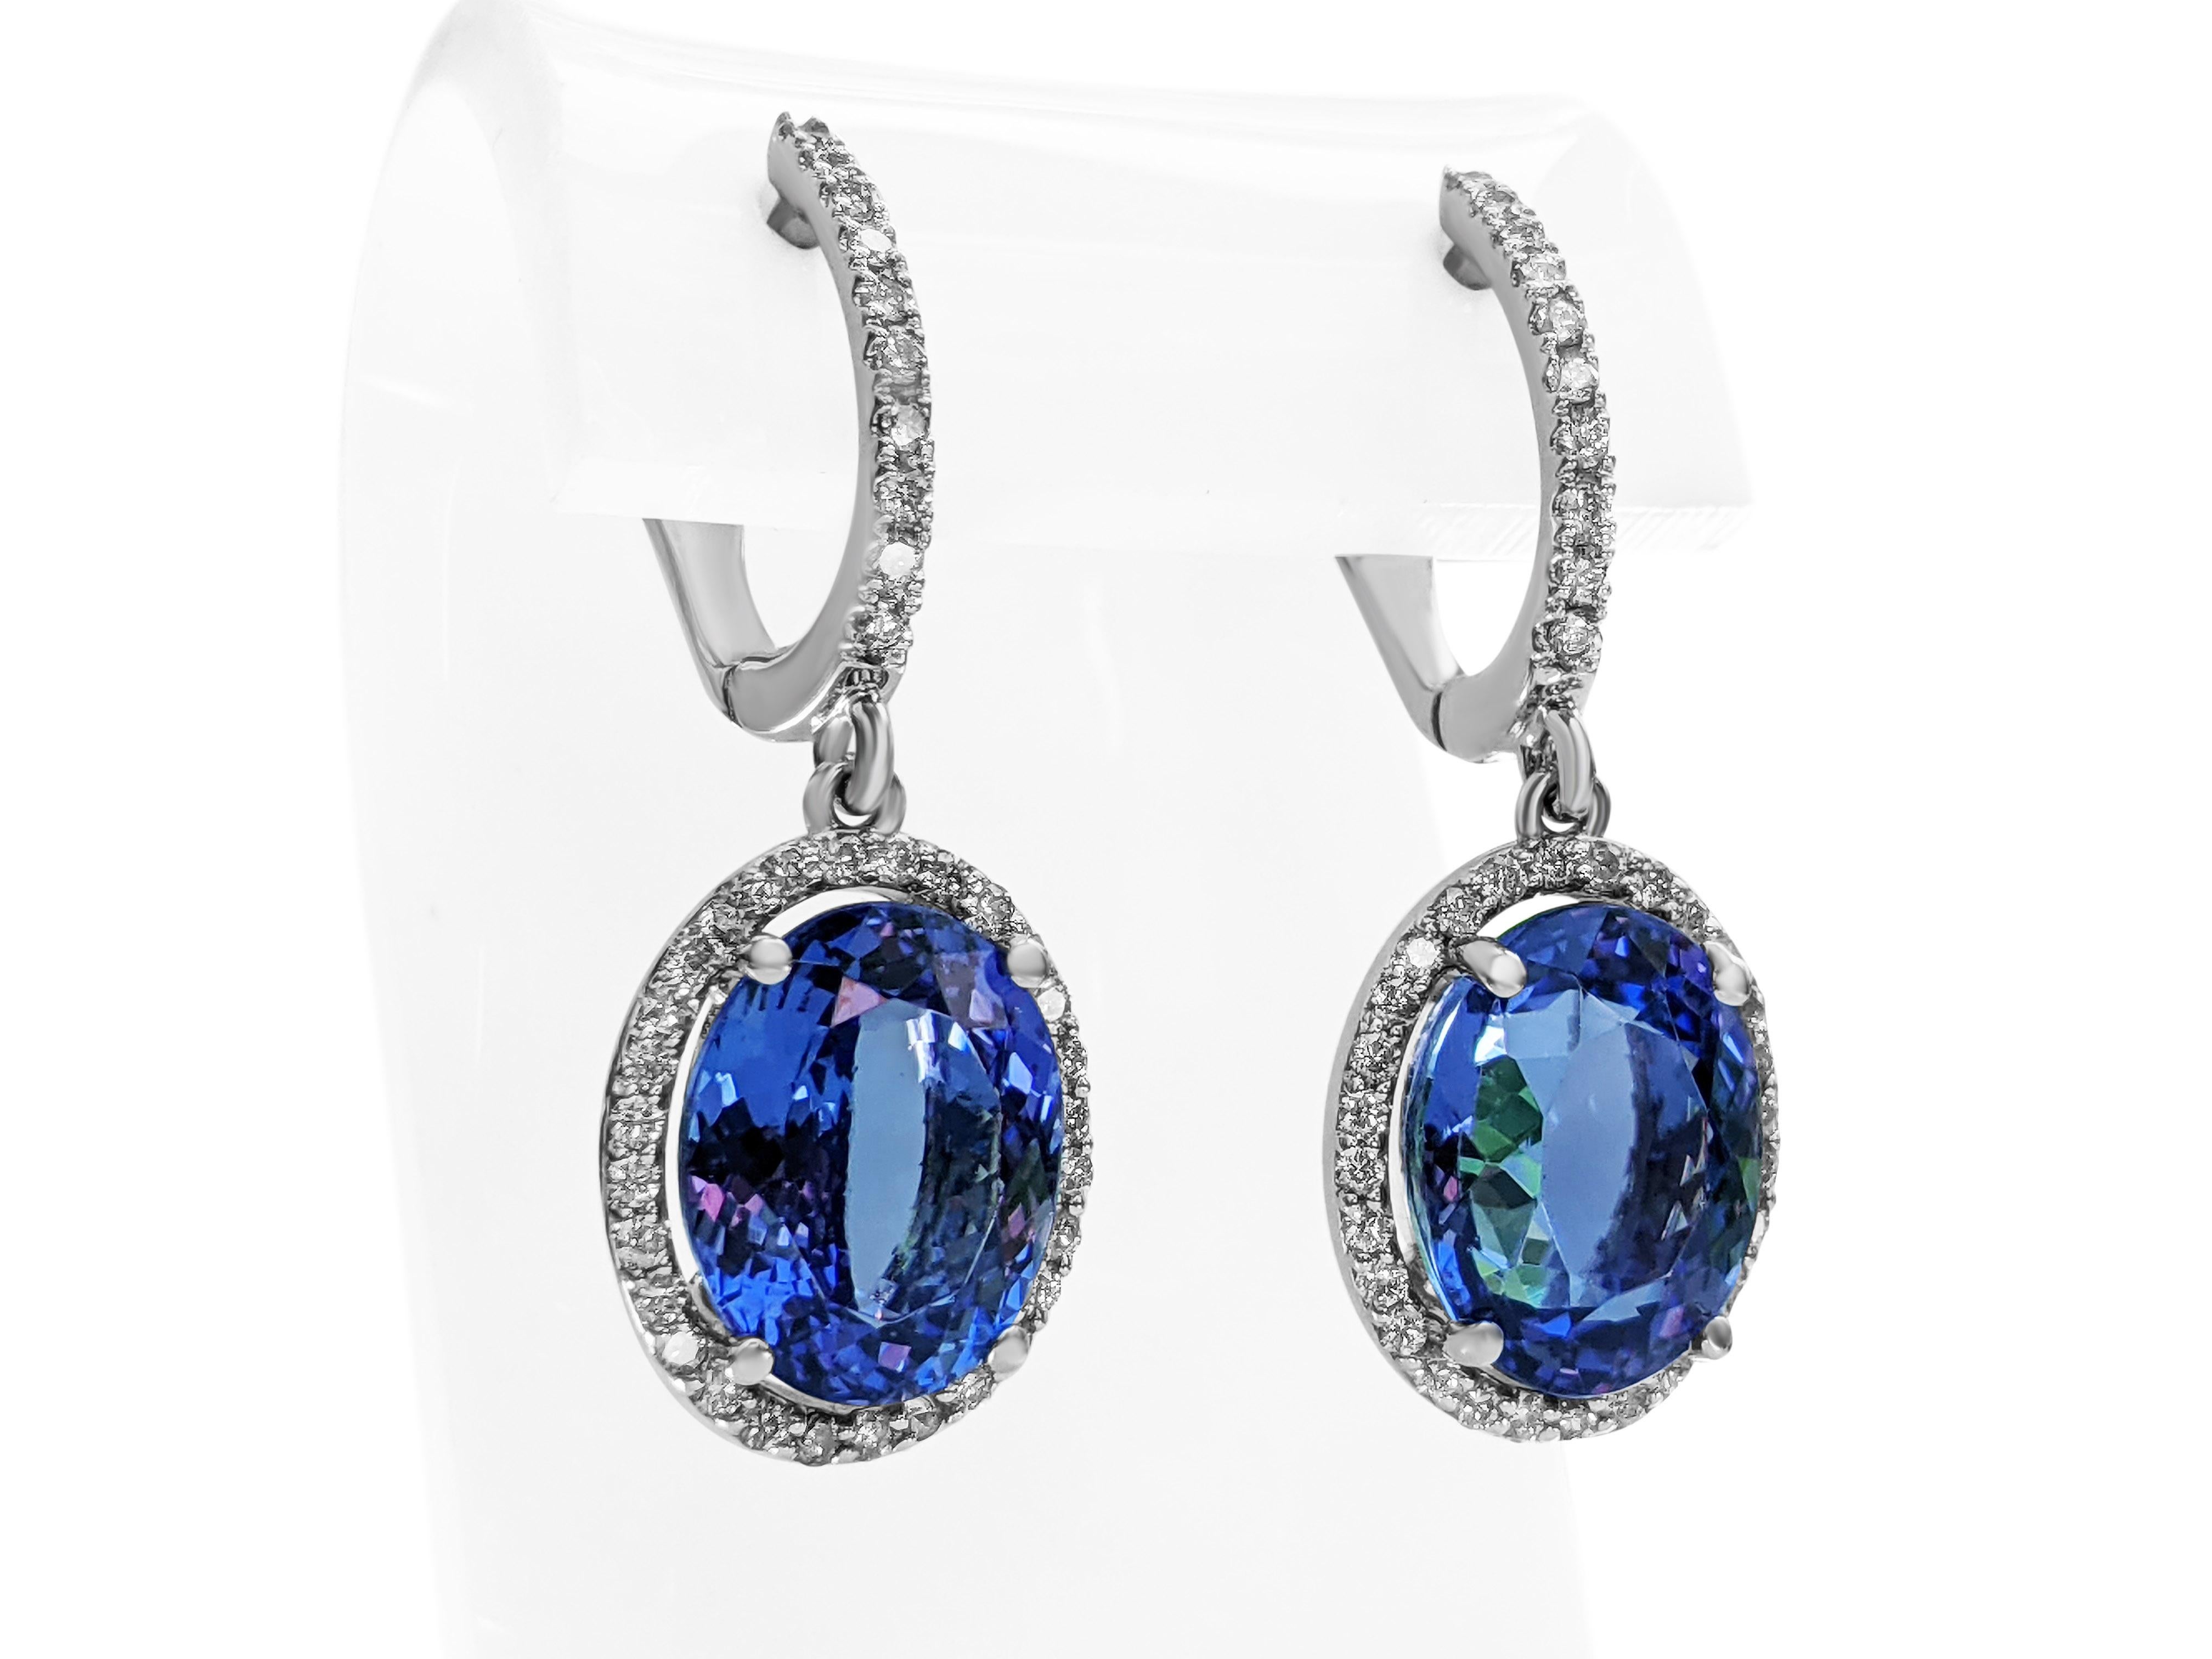 Oval Cut 9.12 Carat Tanzanite and 0.80 Ct Diamonds, 18 Kt. White Gold, Earrings